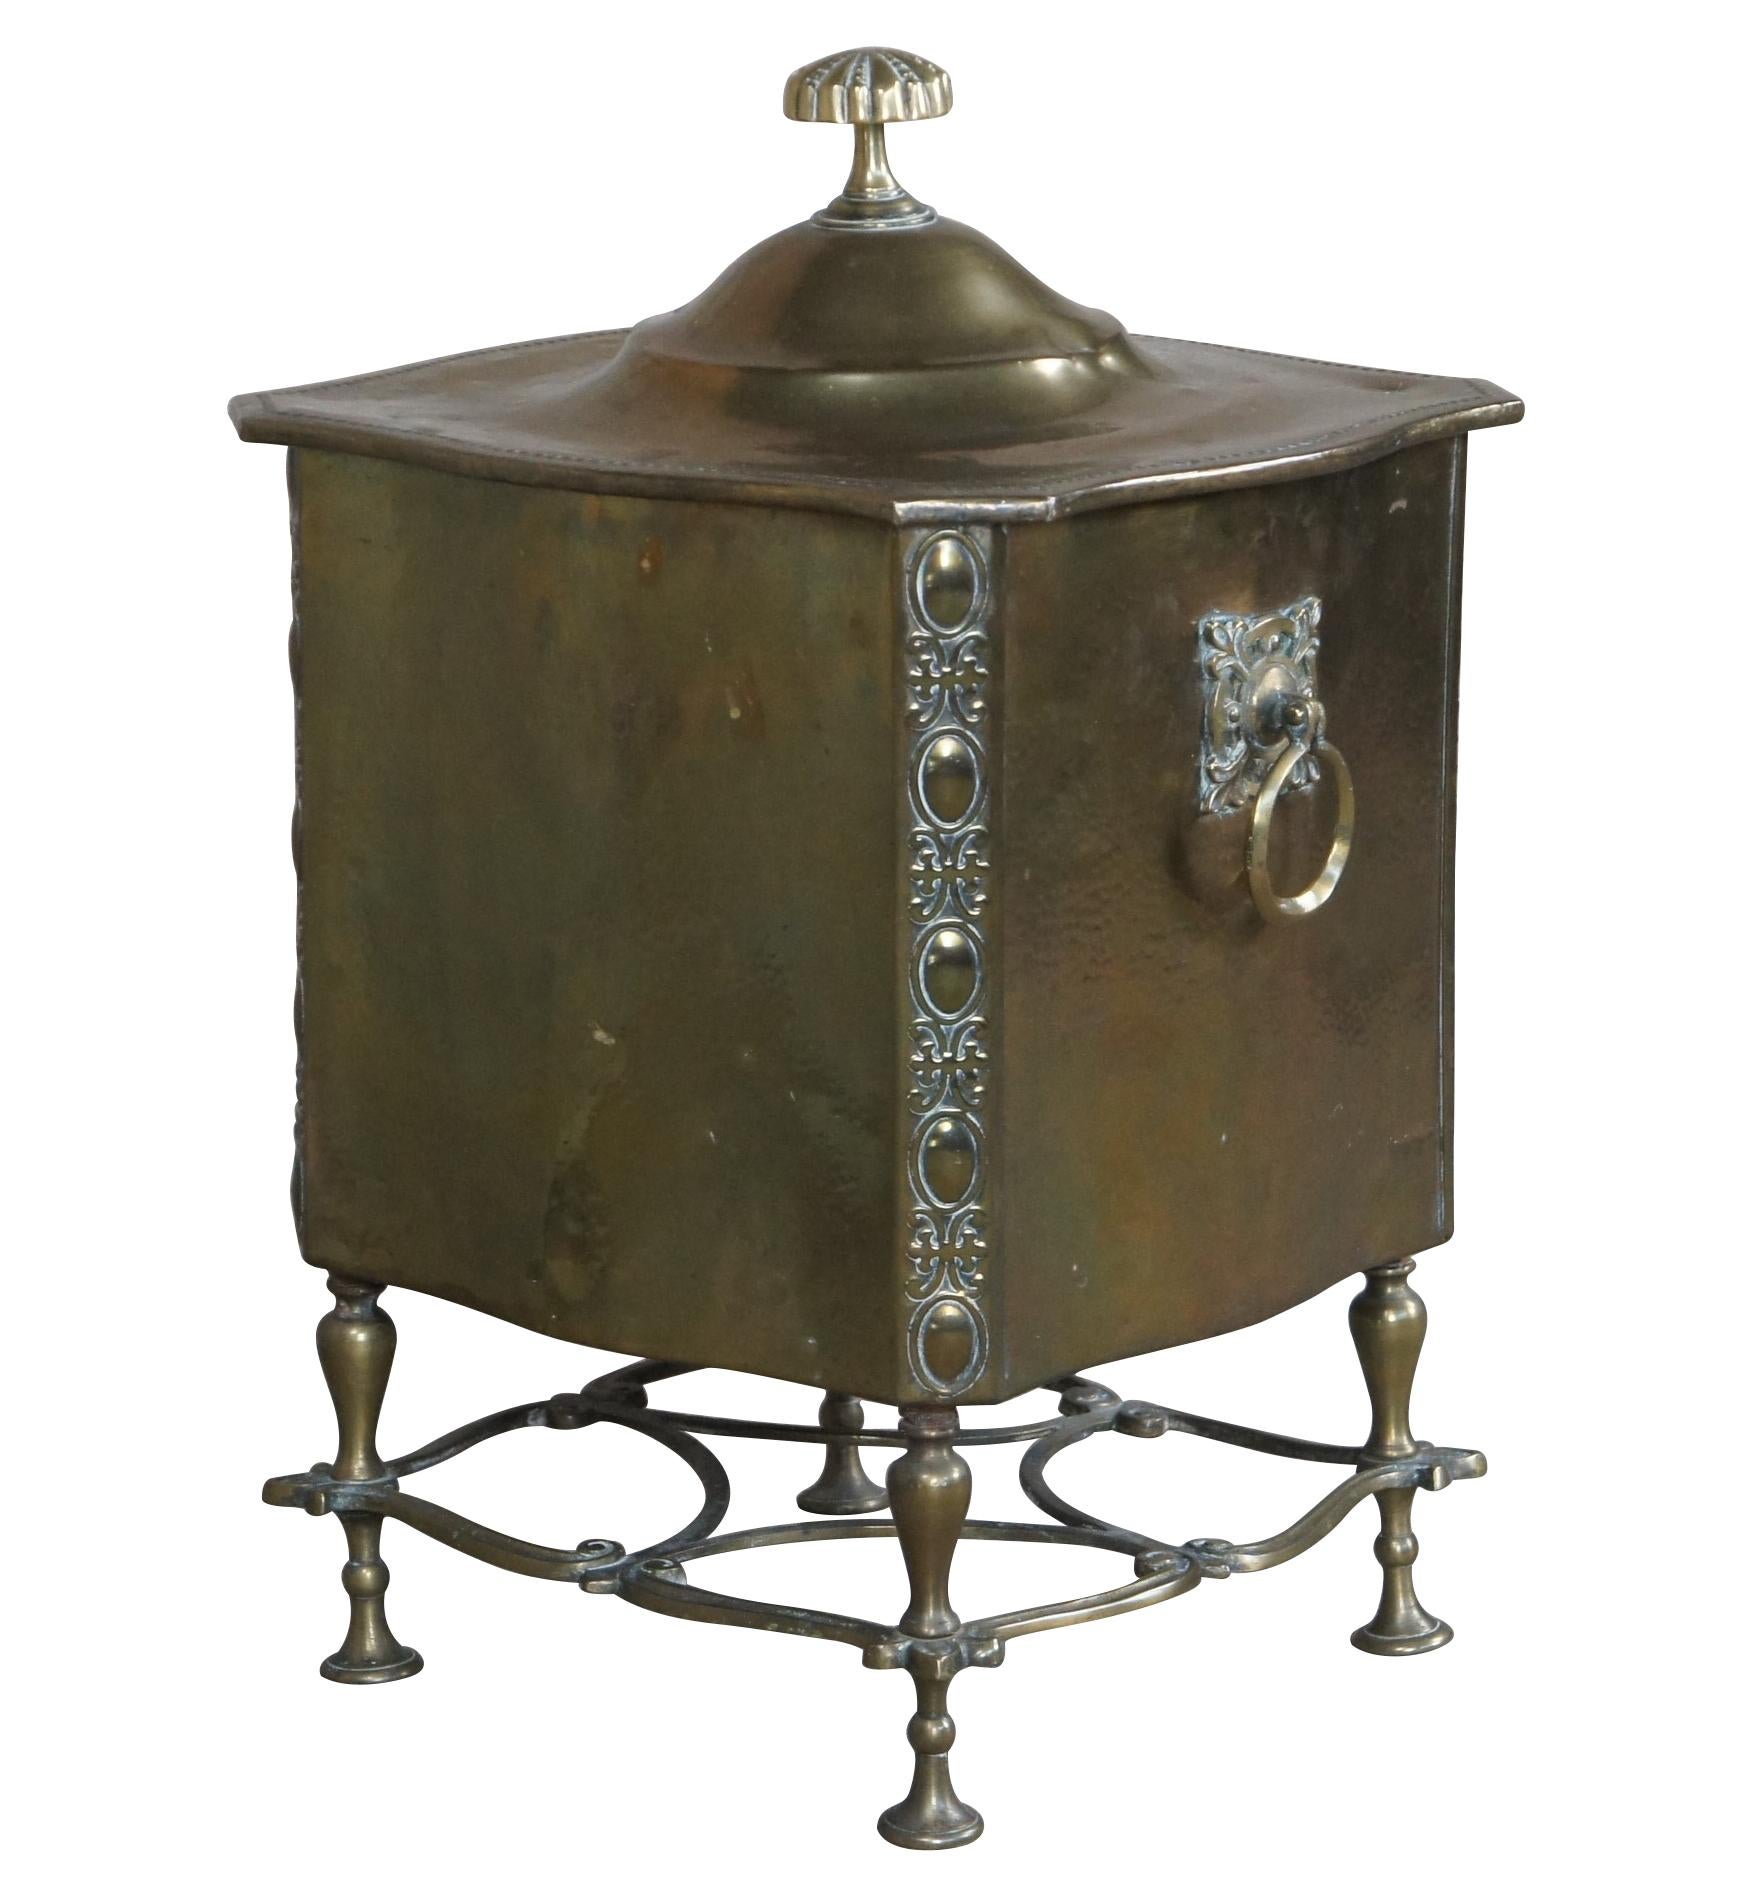 An ornate brass fireside bin.  Featuers a hammered finish with baroque motifs, knocker handles and trumpet footed base with diamond patterned trestle.  Could be used as a trash can, tobacco box or planter.  
